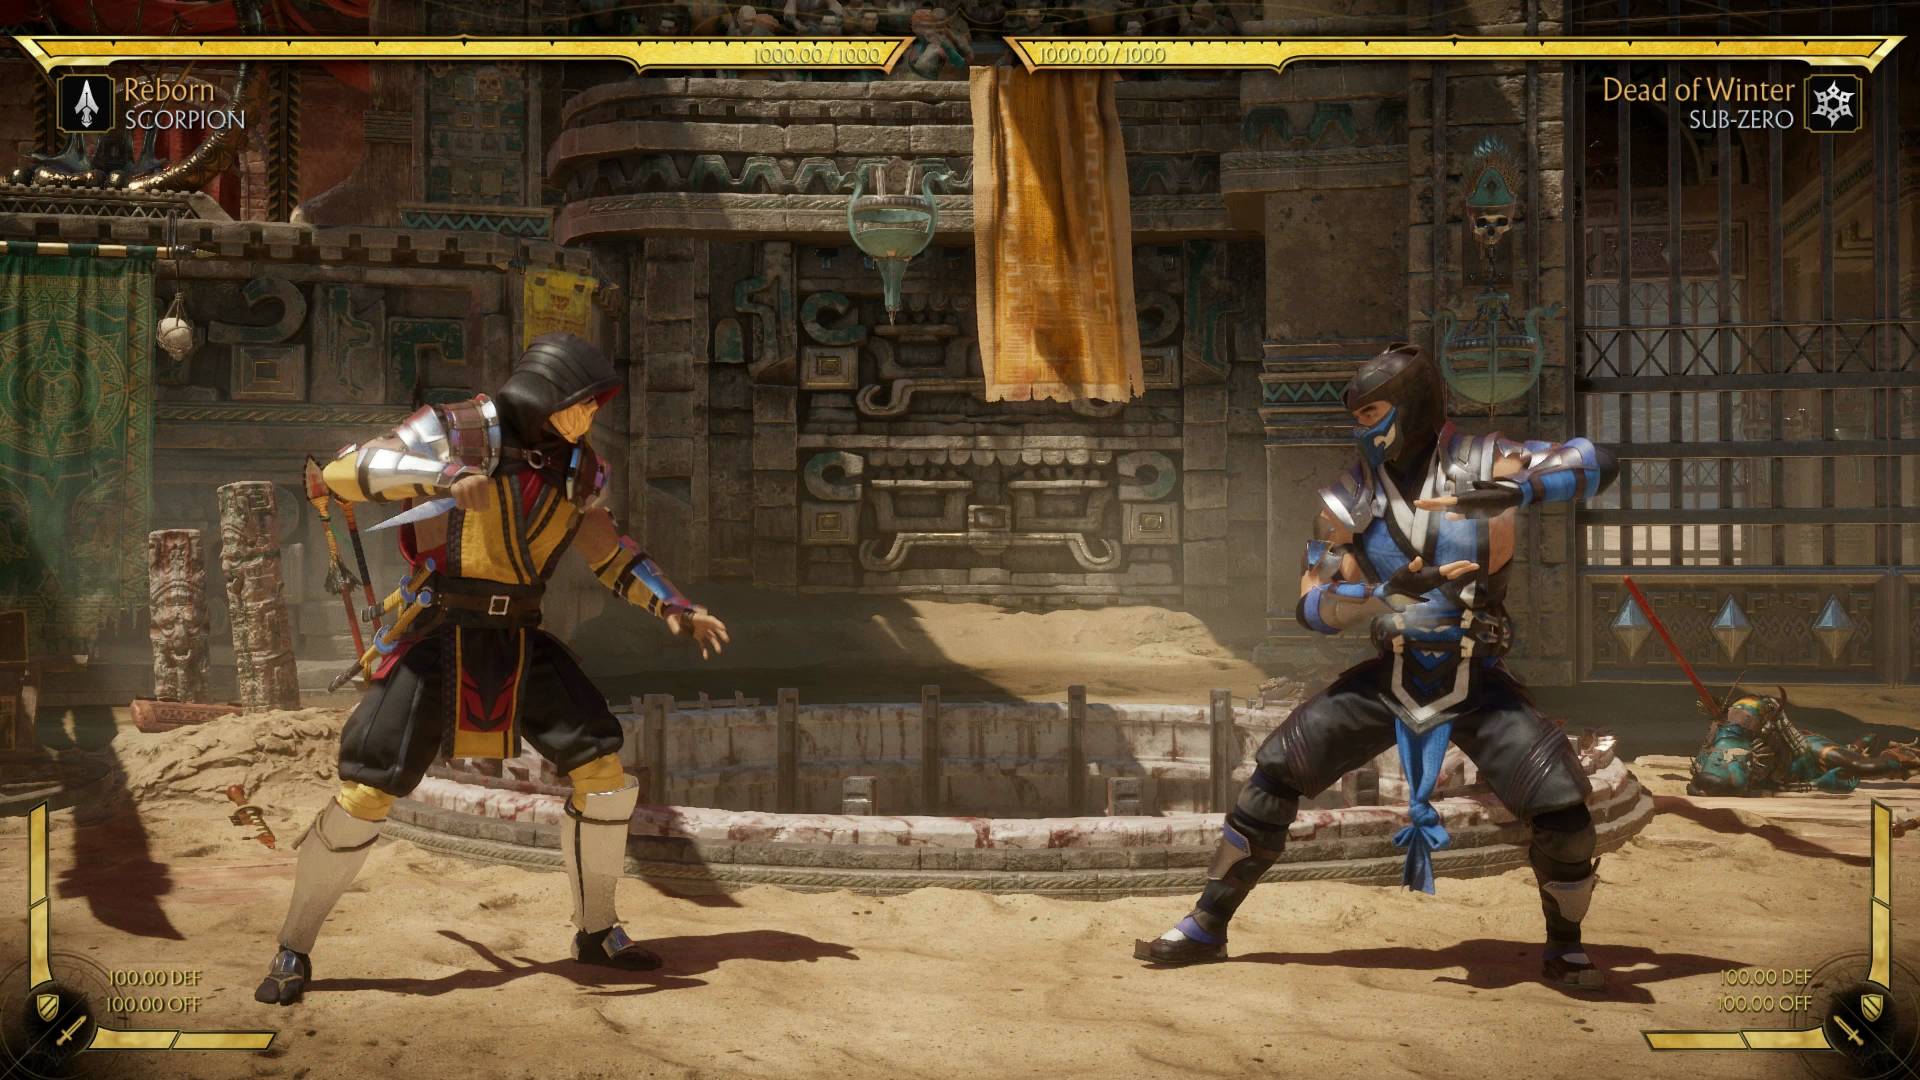 Oof, these Mortal Kombat fatalities leave a mark (or a splat)